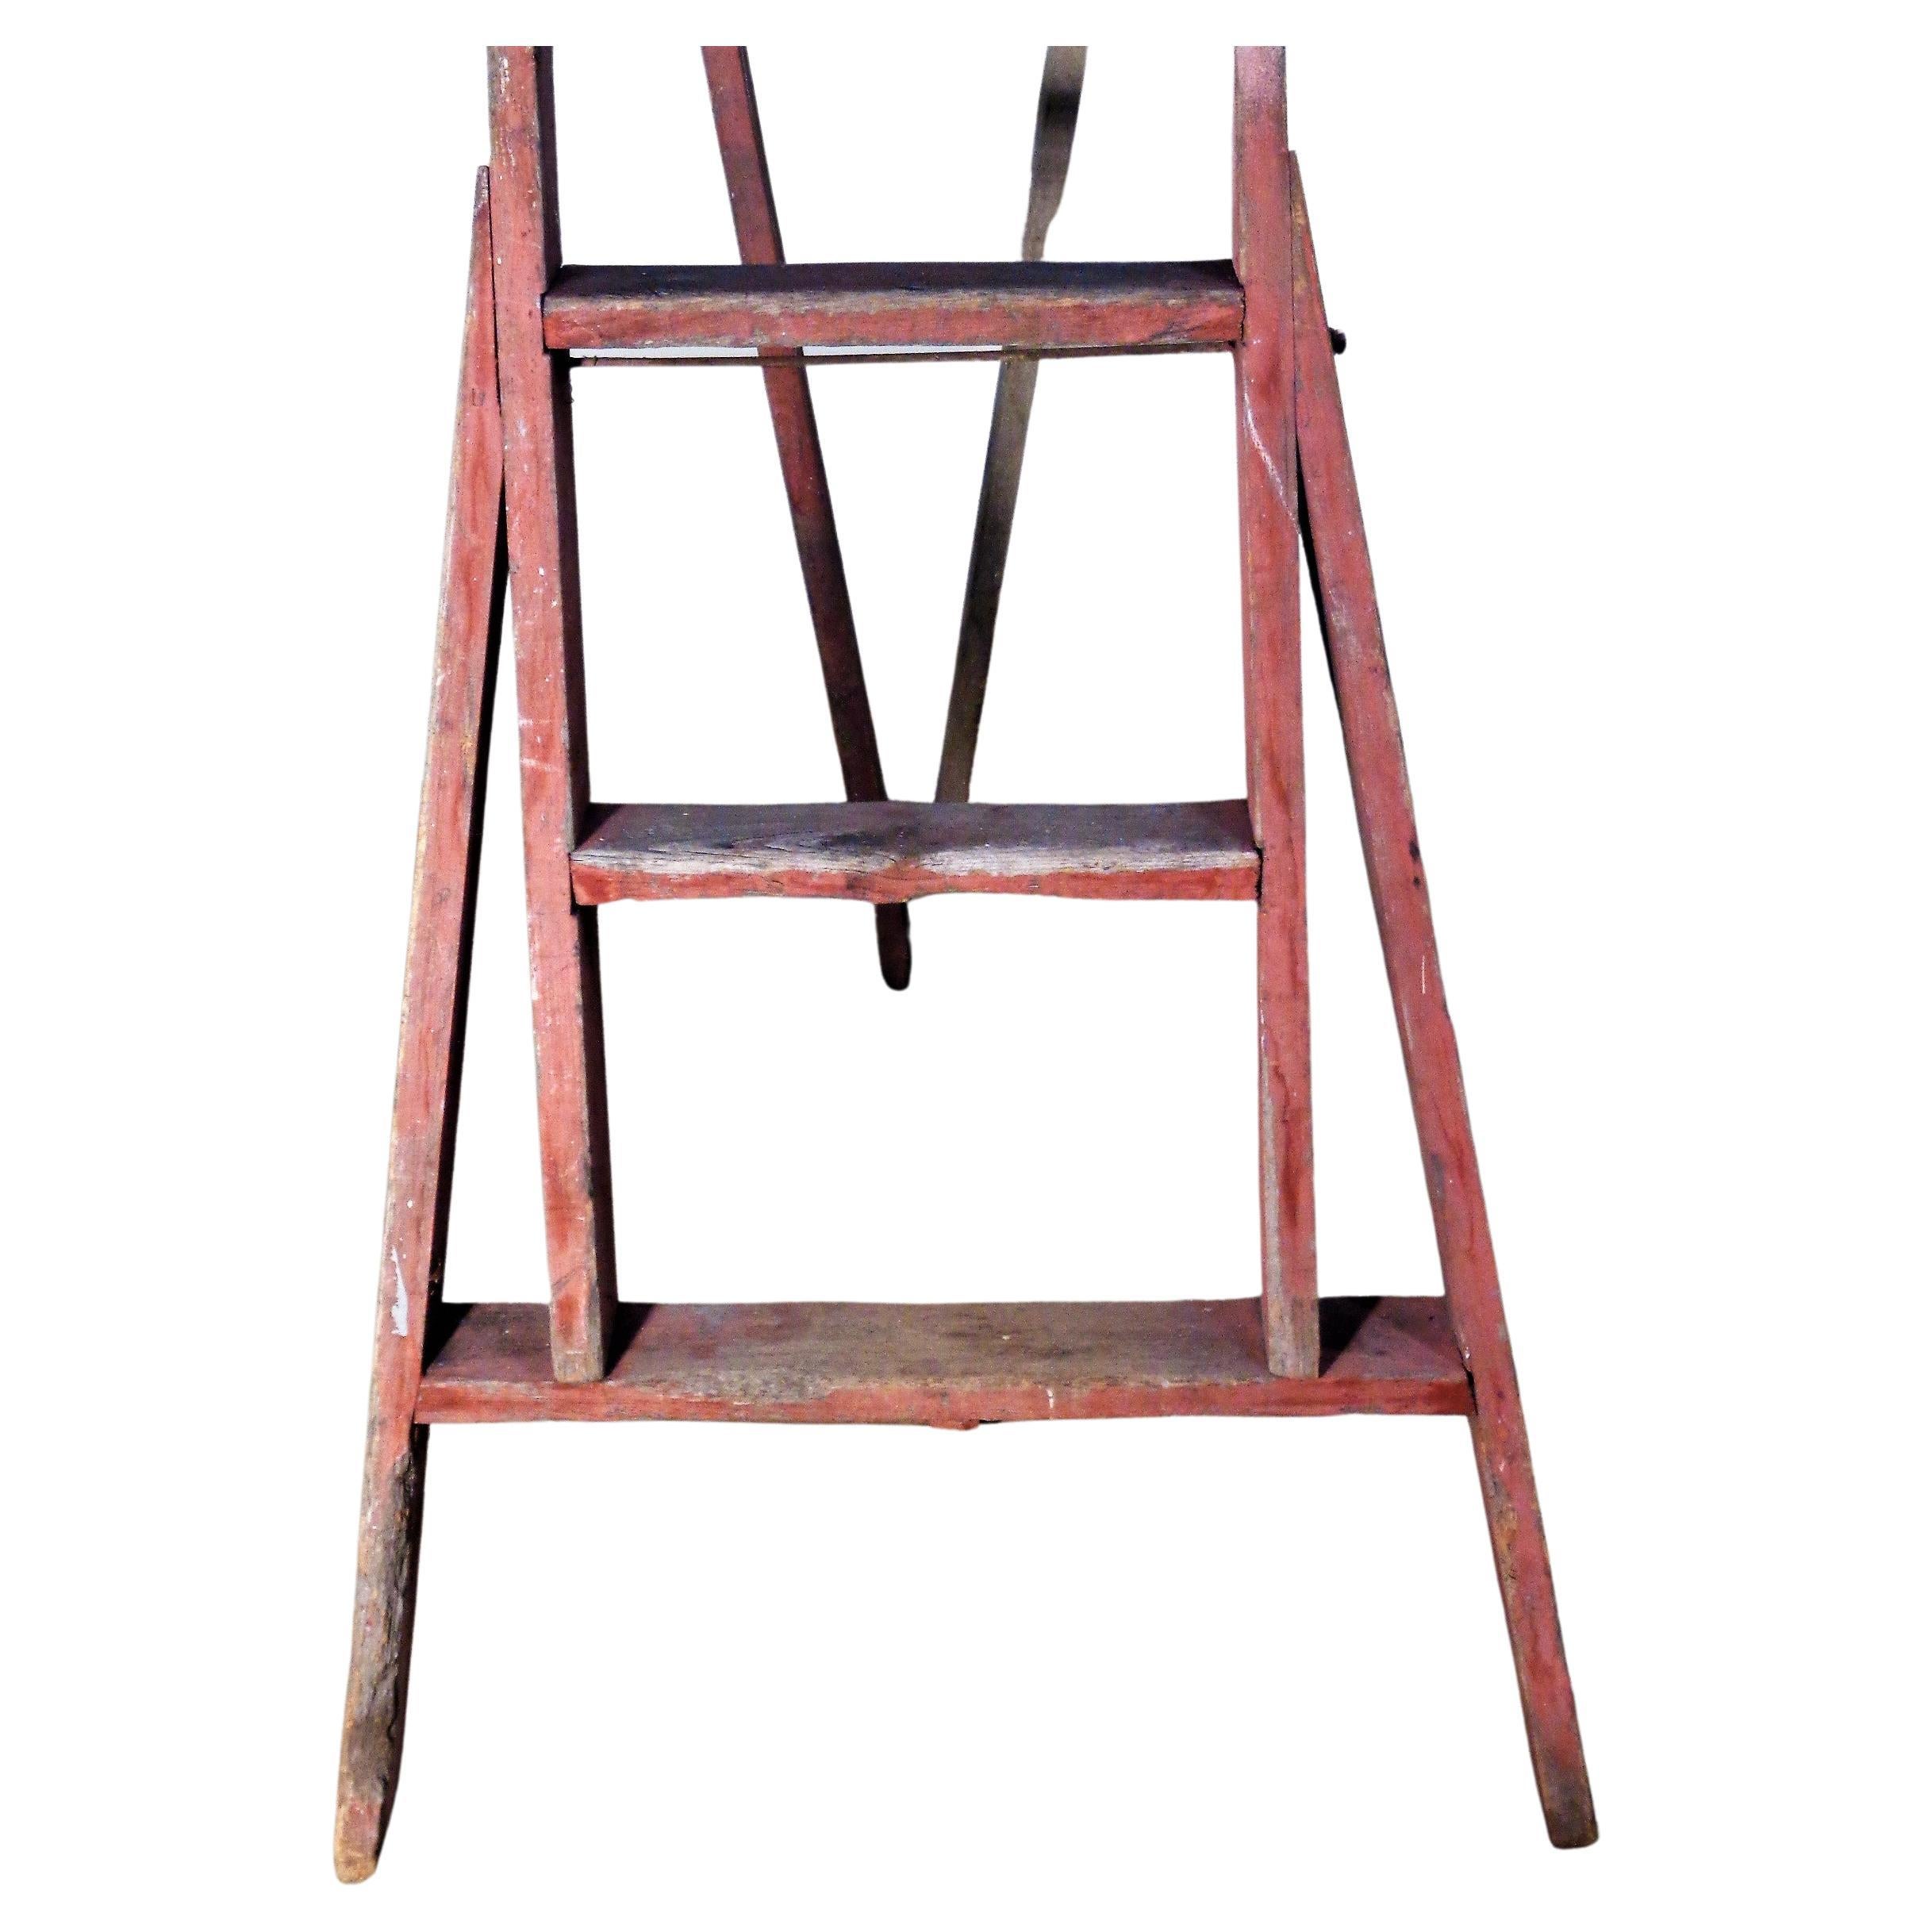  Antique A frame wood and iron apple picking orchard ladder in beautifully aged original red paint washed surface / iron riveted bolted / hand crafted dowel pegged wood construction / signed with name of orchard - G. Aldrich, North Rose NY. Circa